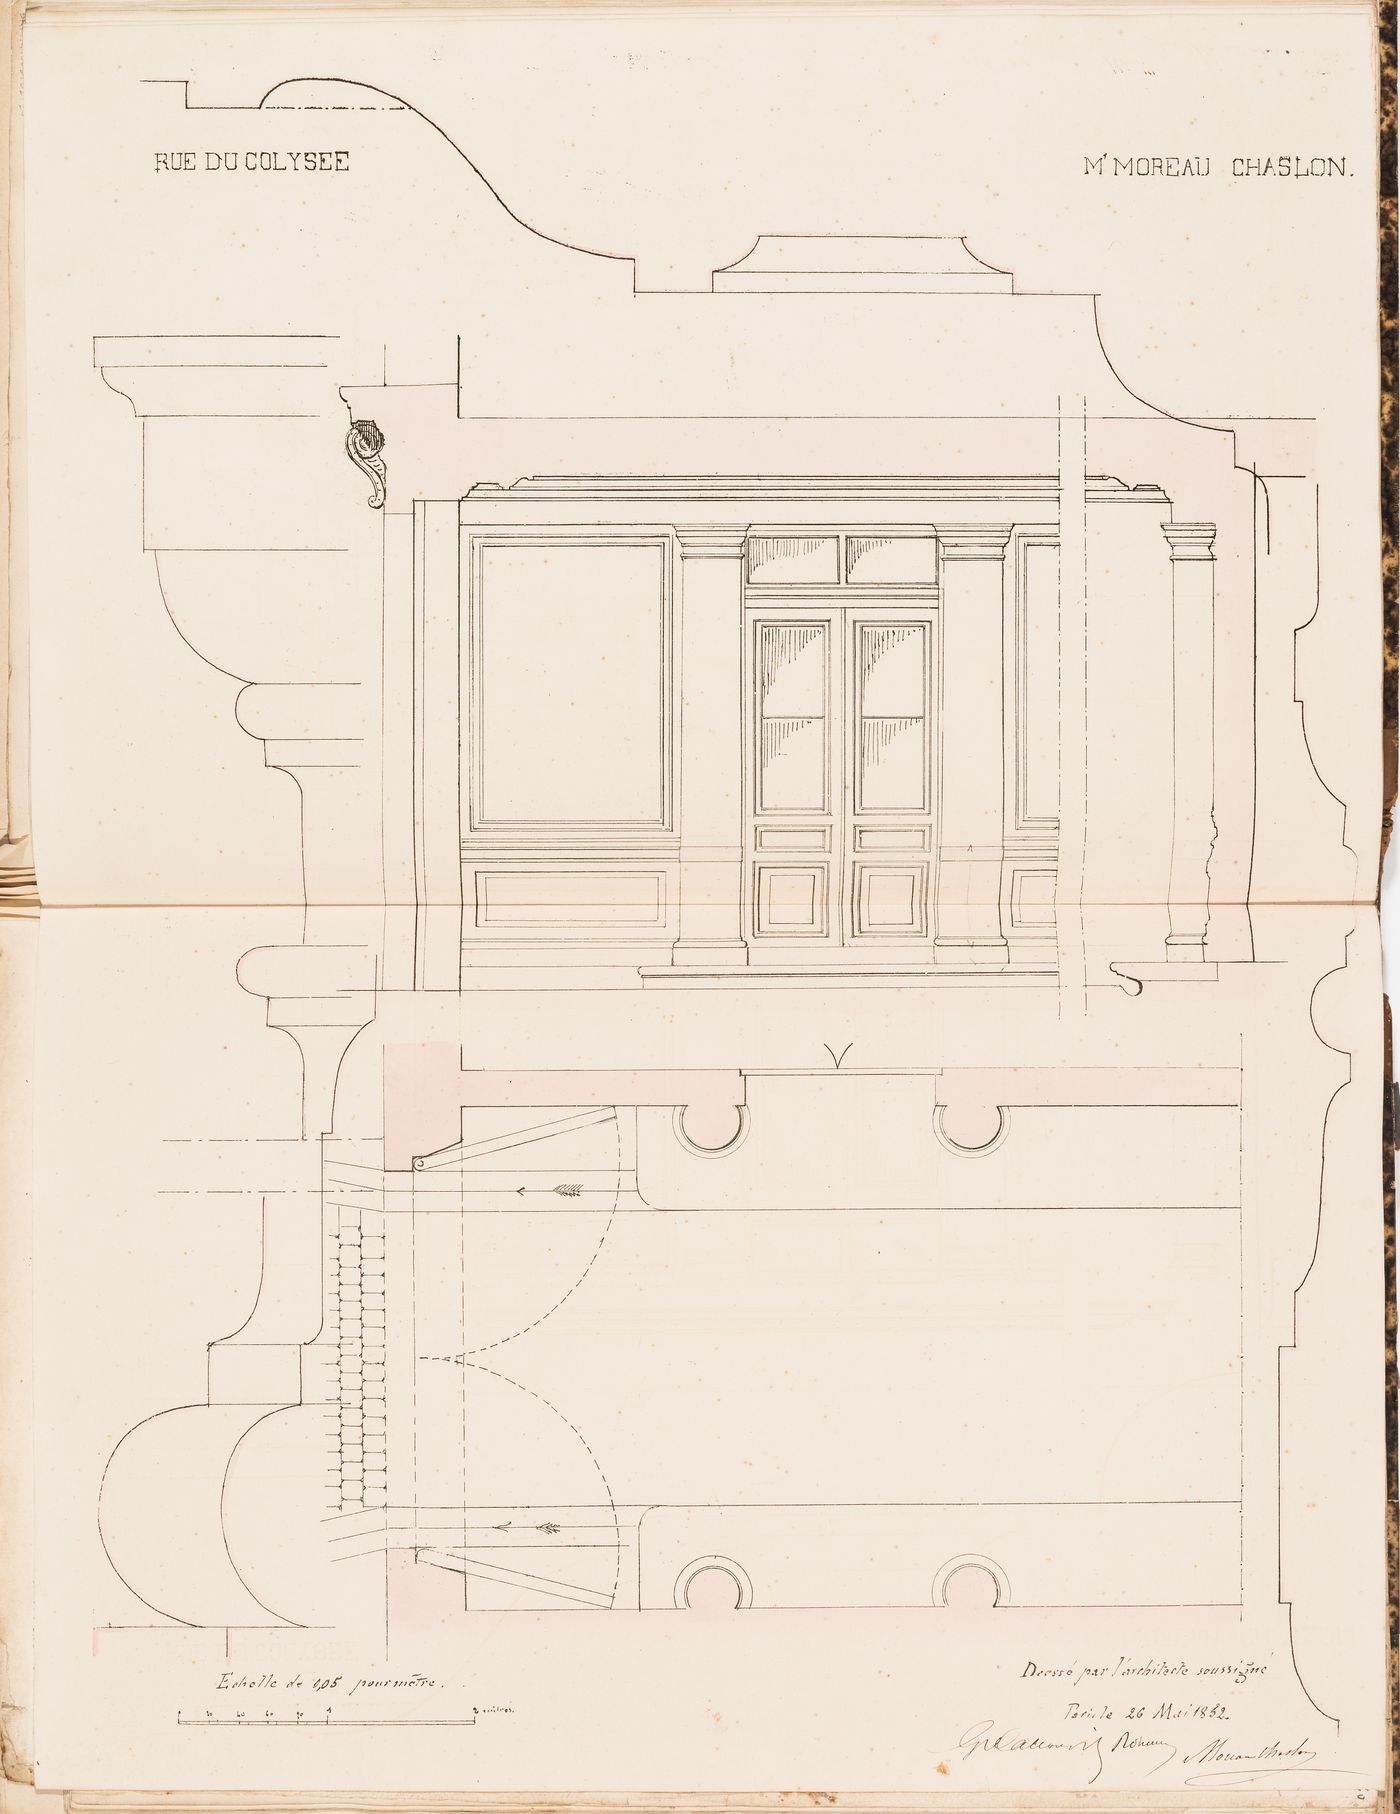 Contract drawing for a house for Monsieur Moreau Chaslon, rue du Colysée, Paris: Partial plan, partial longitudinal section, and profiles of the columns and panelling for the passage of the "porte cochère"